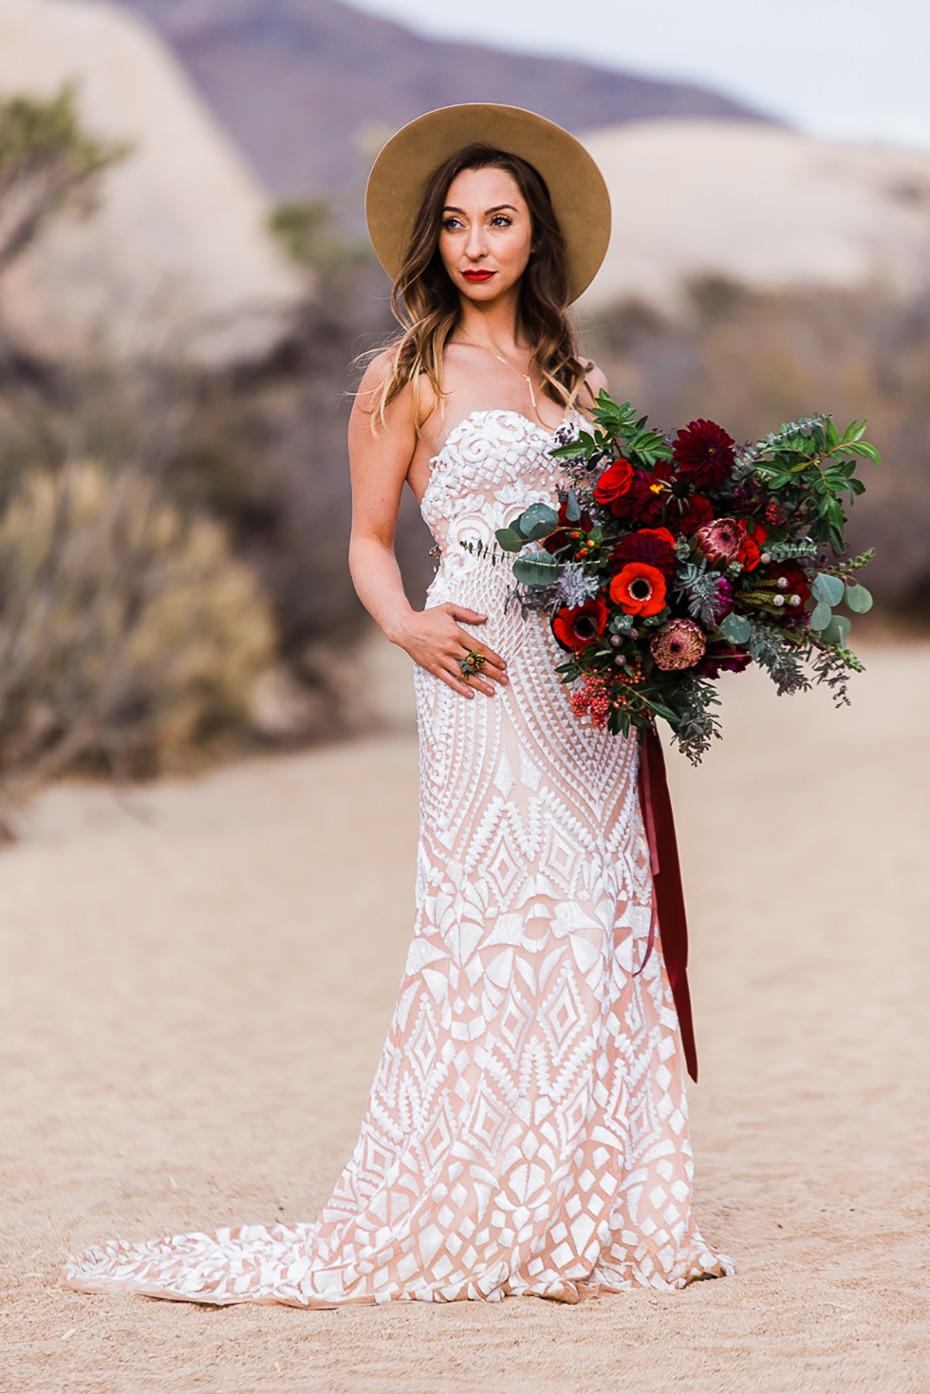 so in love with this wedding dress and overall bridal style